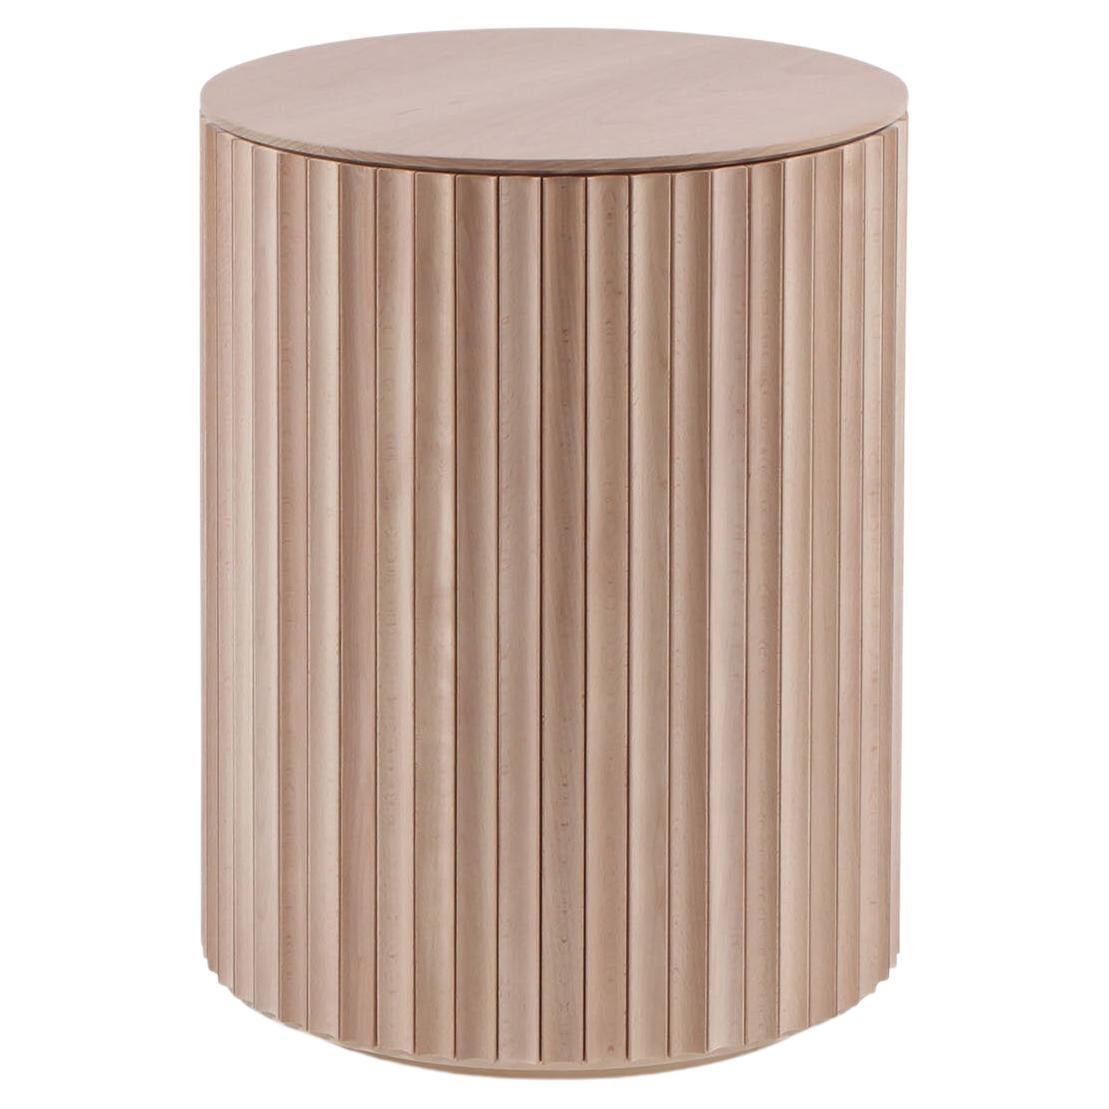 Pilar Round End Table / Bleached Maple Wood by INDO-